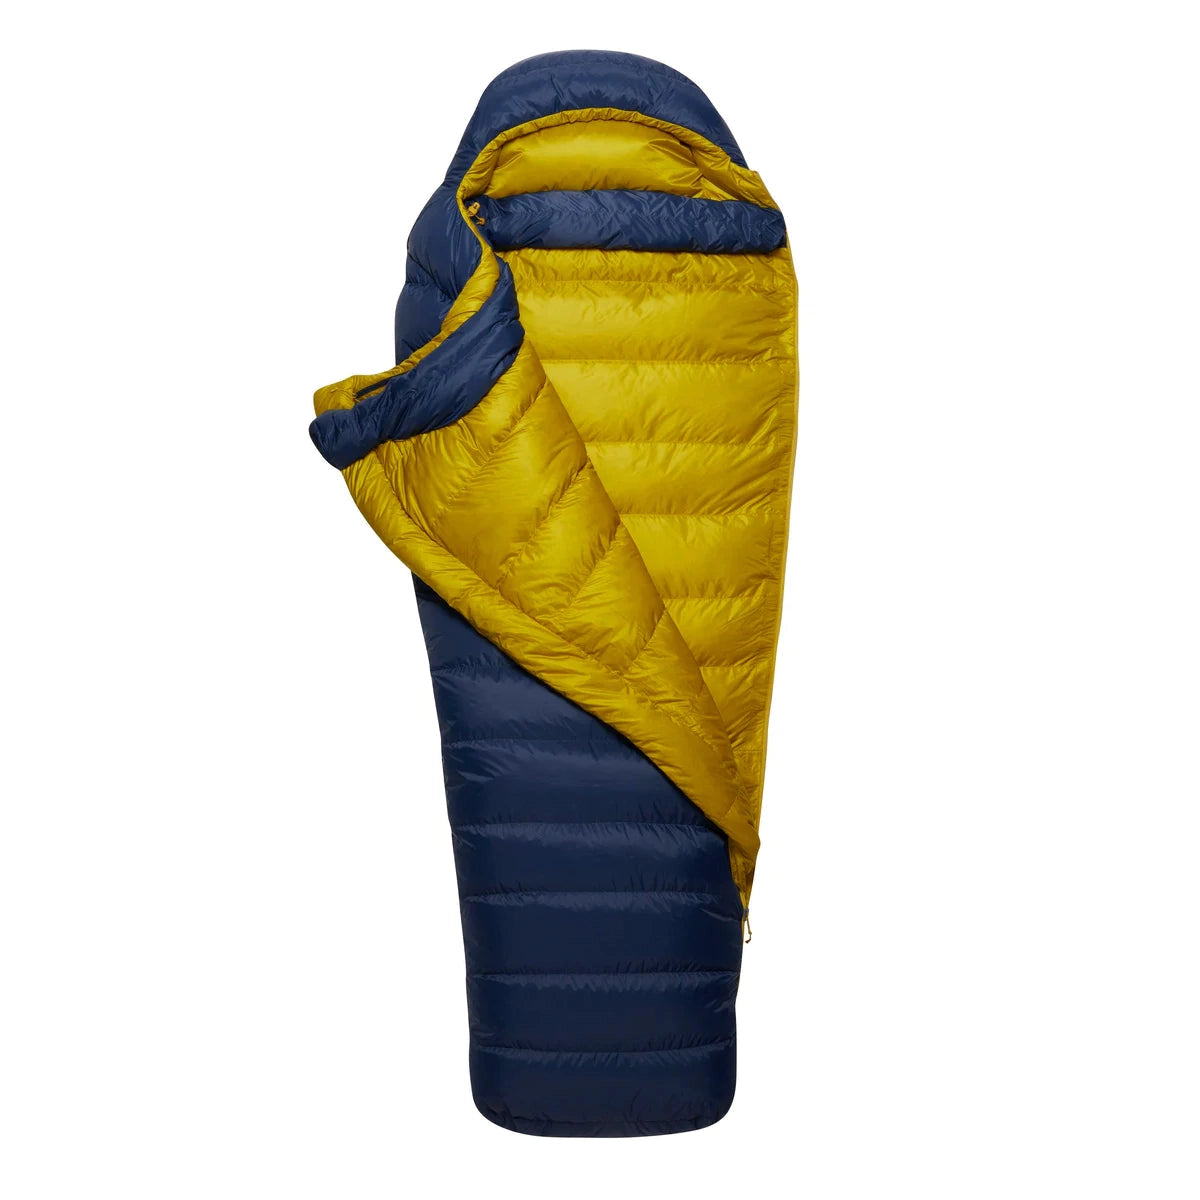 RABRab Women's Ascent Pro 600Outdoor Action